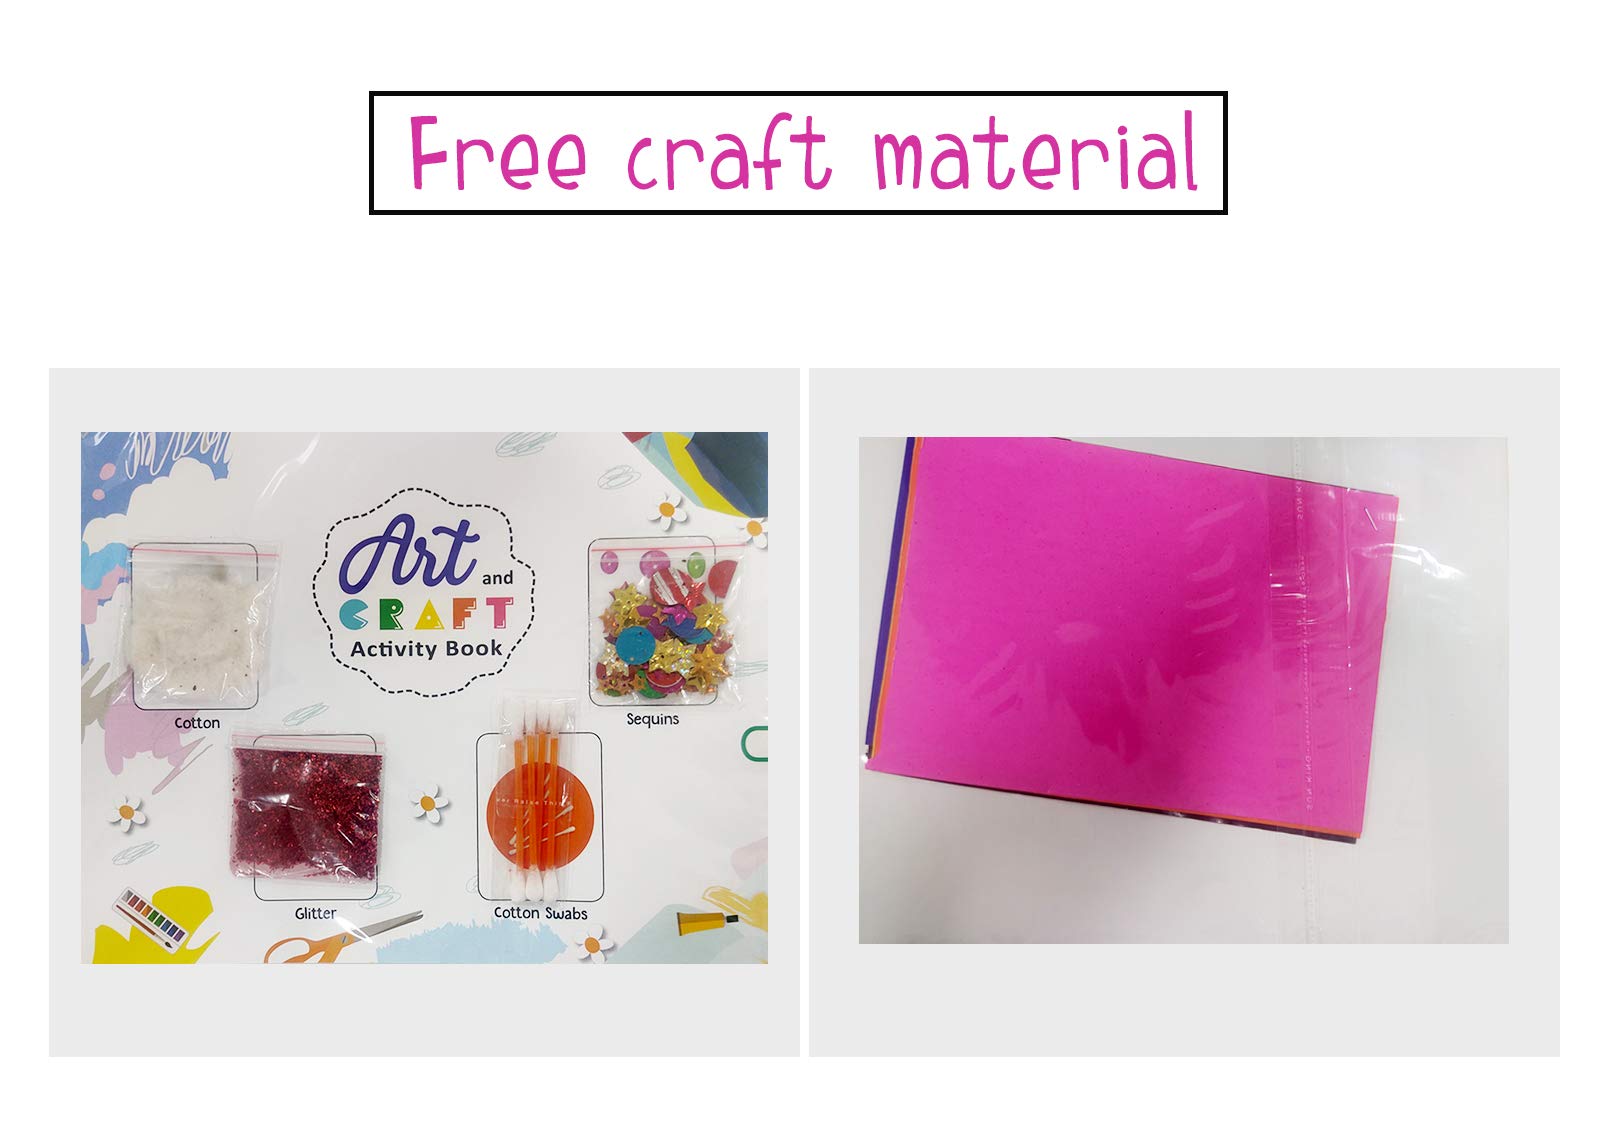 Pegasus Art and Craft Activity Book 1 for 4-5 Year old kids with free craft material